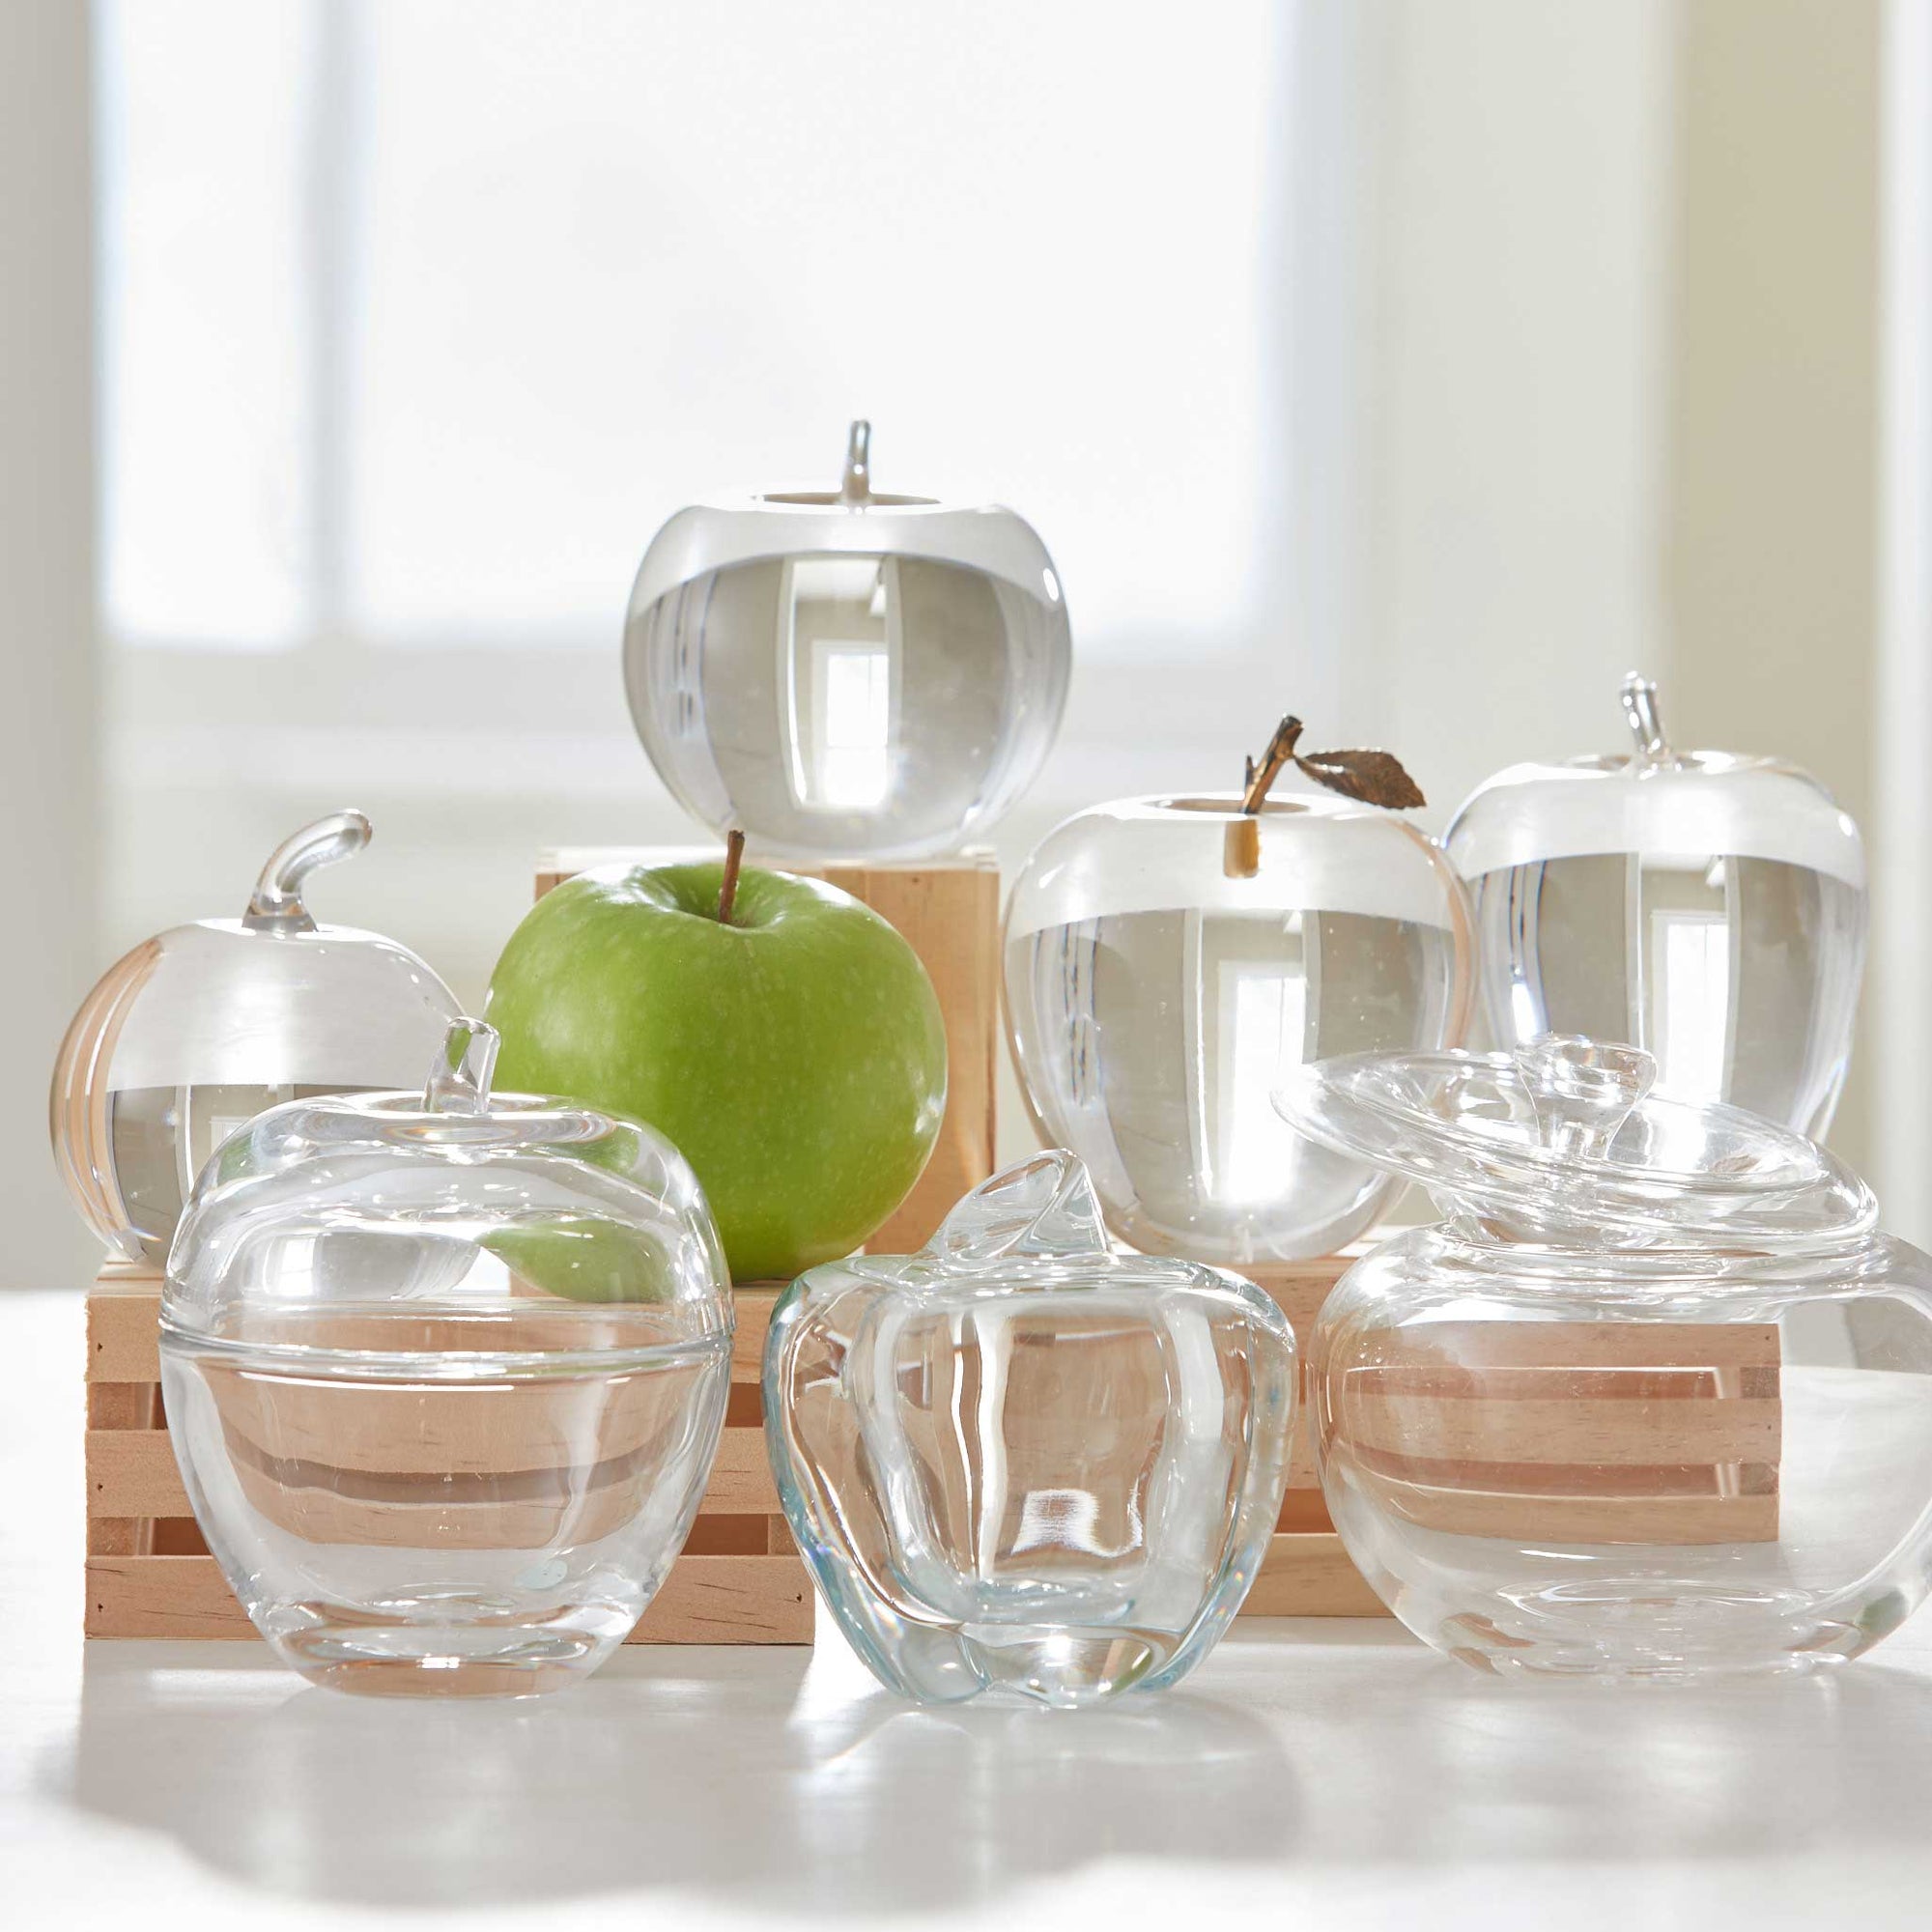 VINTAGE CRYSTAL AND GLASS APPLE COLLECTION